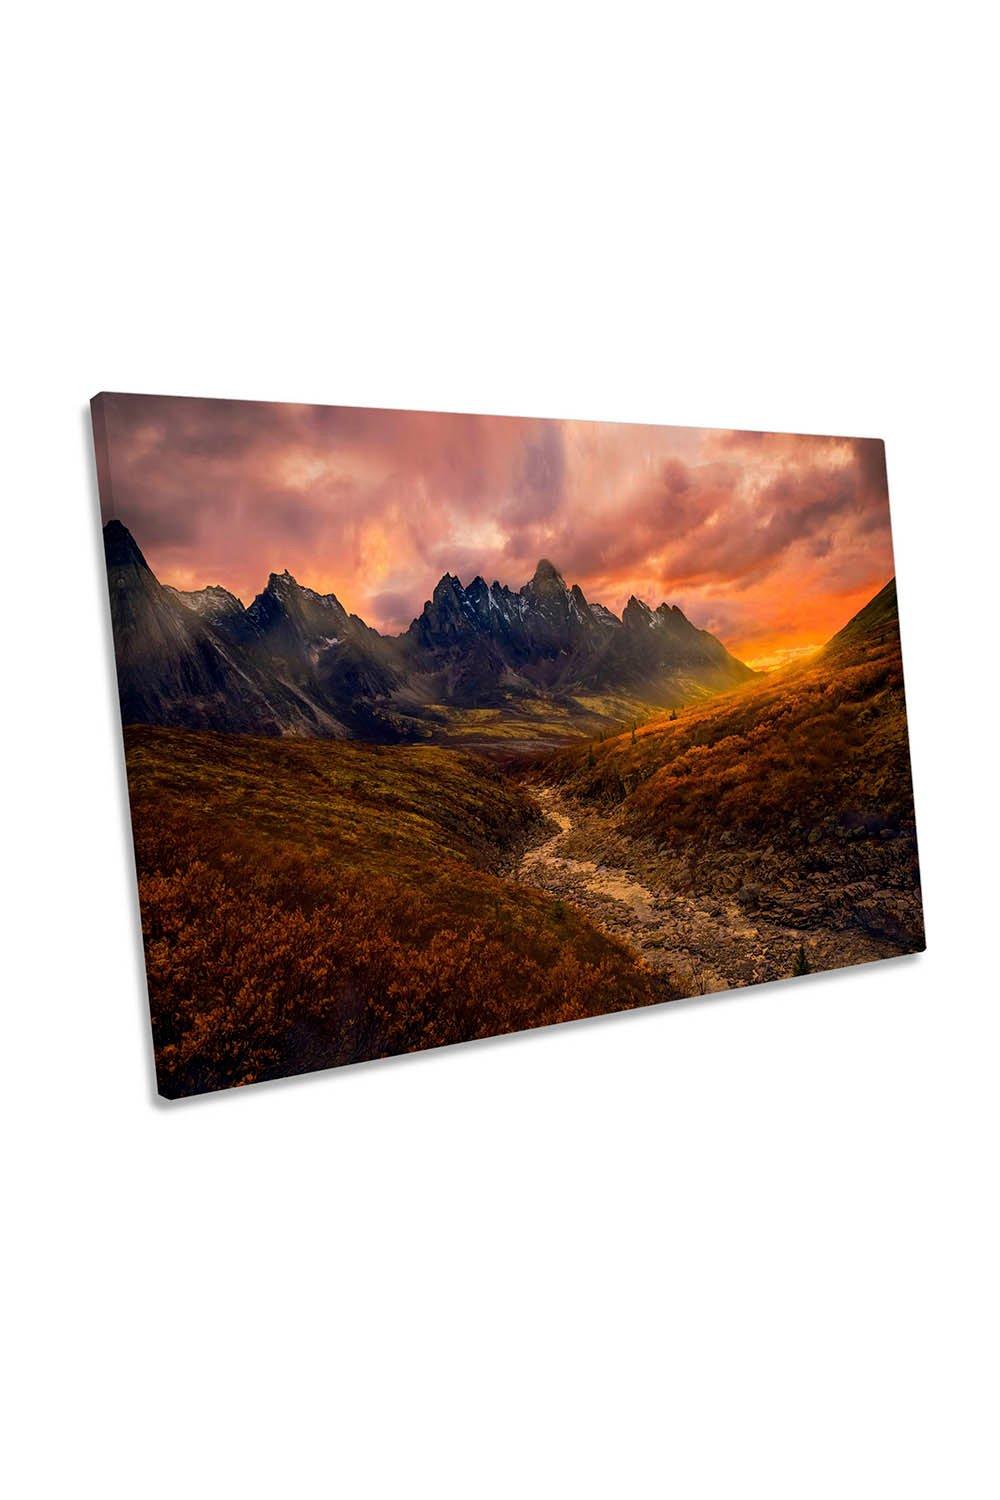 Yukon Sunset Canada Mountains Landscape Canvas Wall Art Picture Print